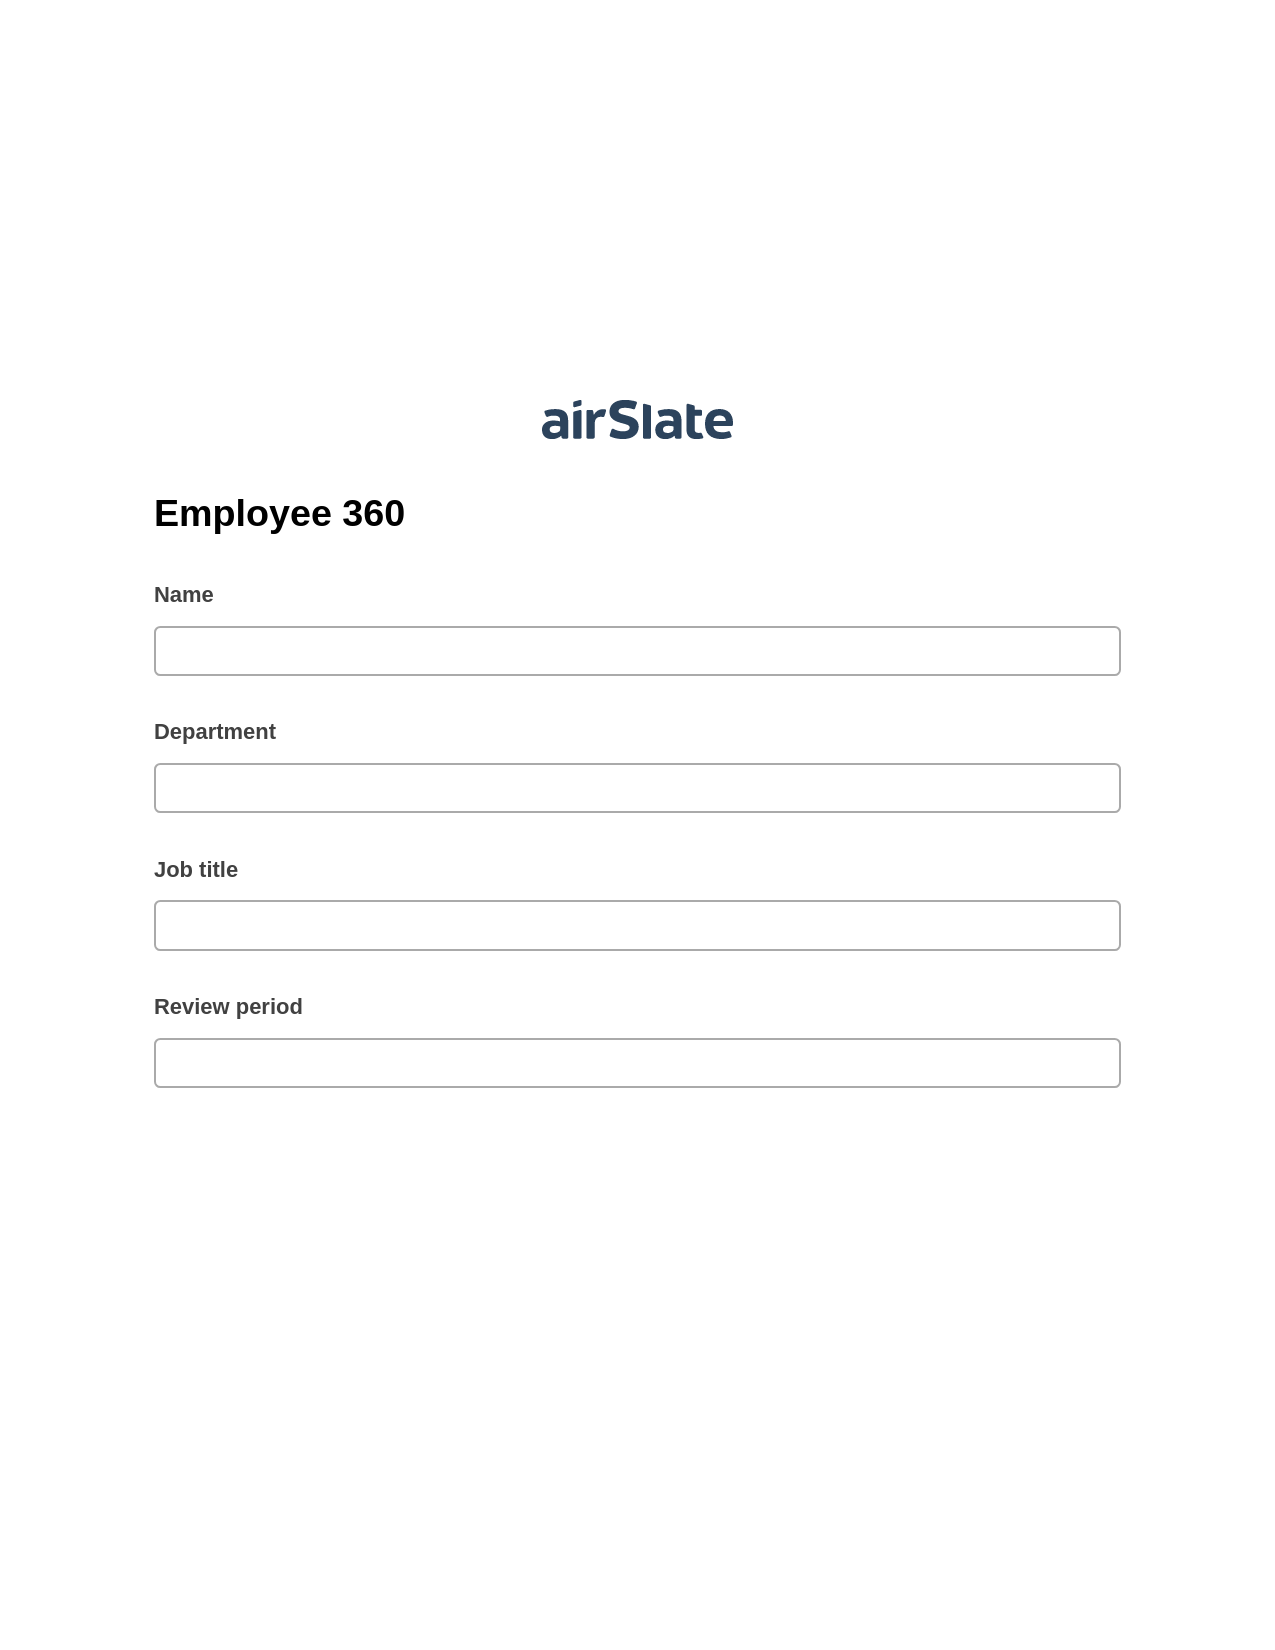 Employee 360 Pre-fill Document Bot, Create Salesforce Records Bot, Export to WebMerge Bot